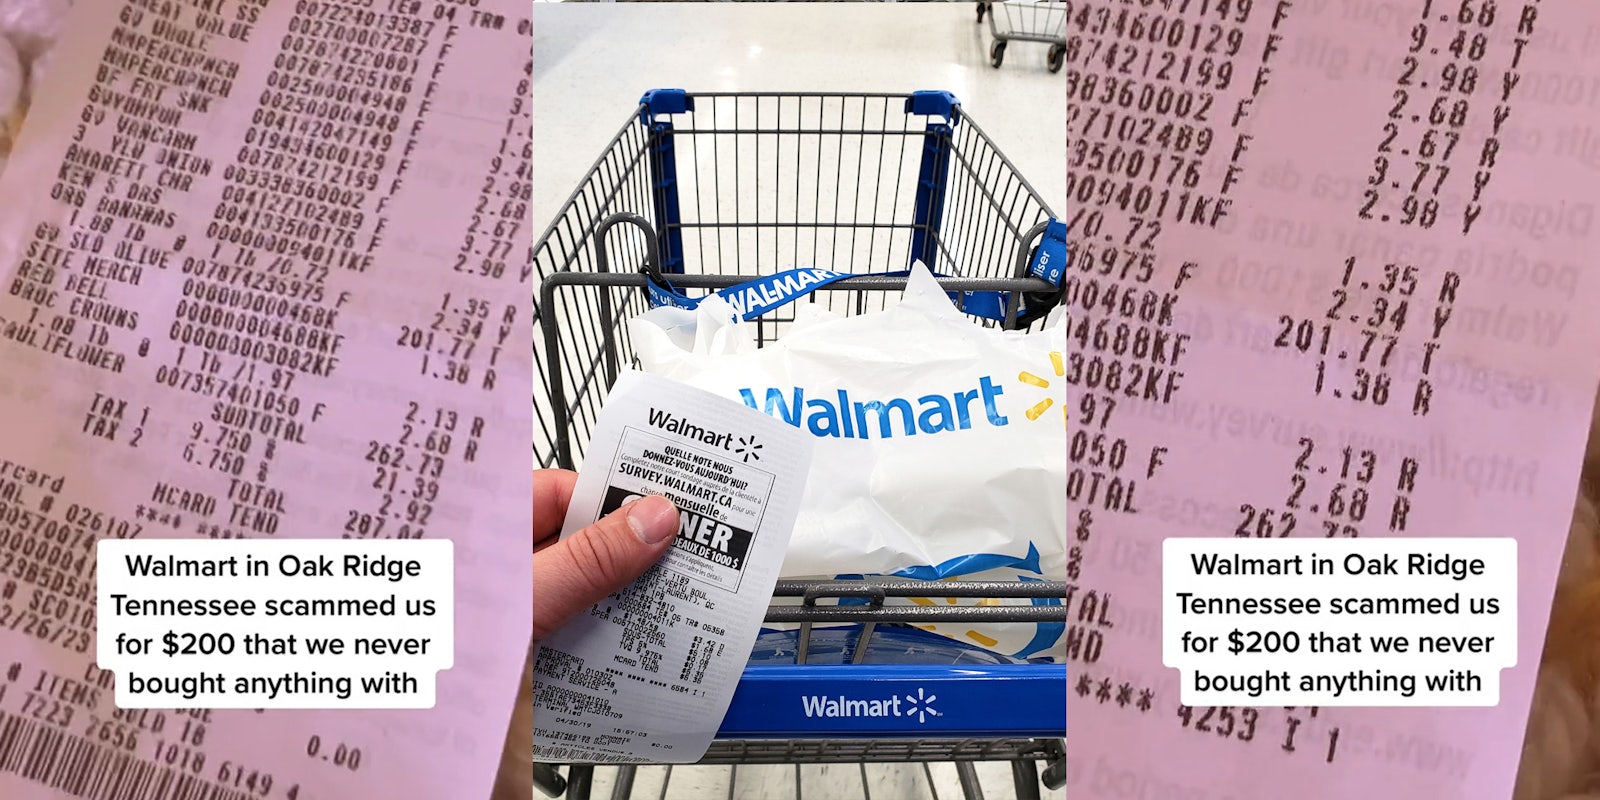 Walmart receipt with $201.77 charge for SITE MERCH with caption 'Walmart in Oak Ridge Tennessee scammed us for $200 that we never bought anything with' (l) hand holding Walmart receipt in store with cart and bag (c) Walmart receipt with $201.77 charge for SITE MERCH with caption 'Walmart in Oak Ridge Tennessee scammed us for $200 that we never bought anything with' (r)